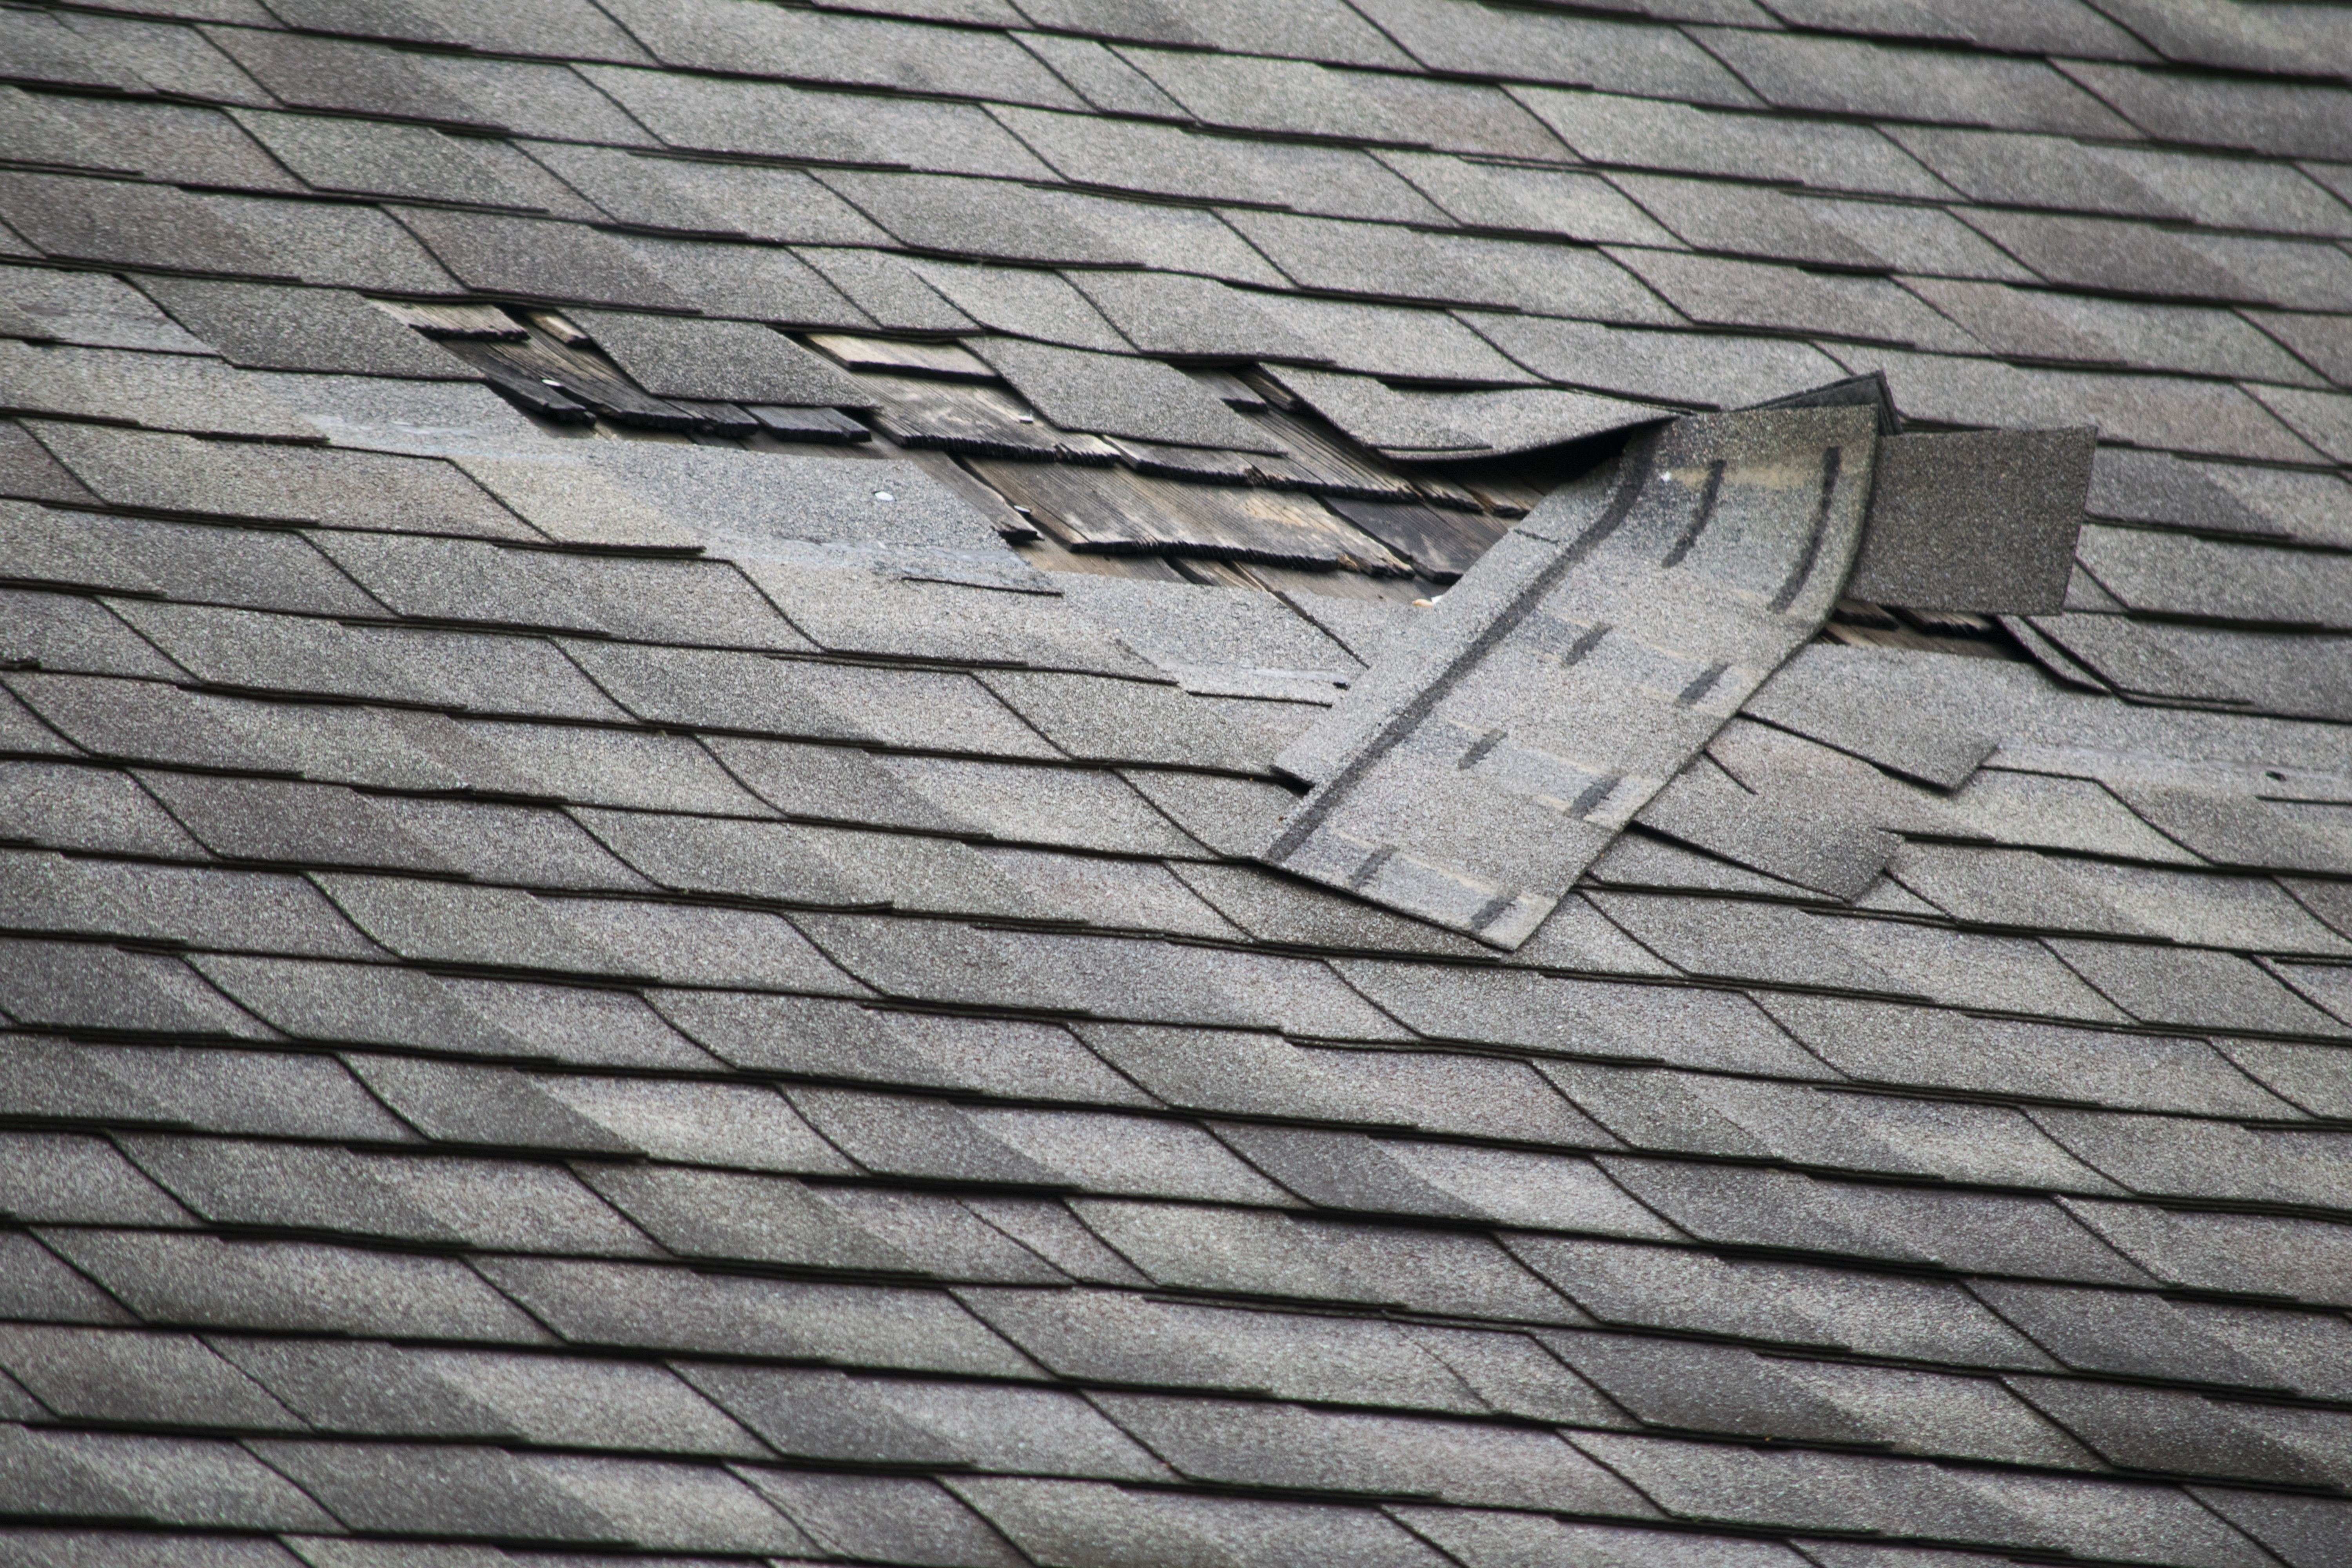 843-647-3183 Summerville South Carolina Roof Repair and Replacement Services from Titan Roofing LLC